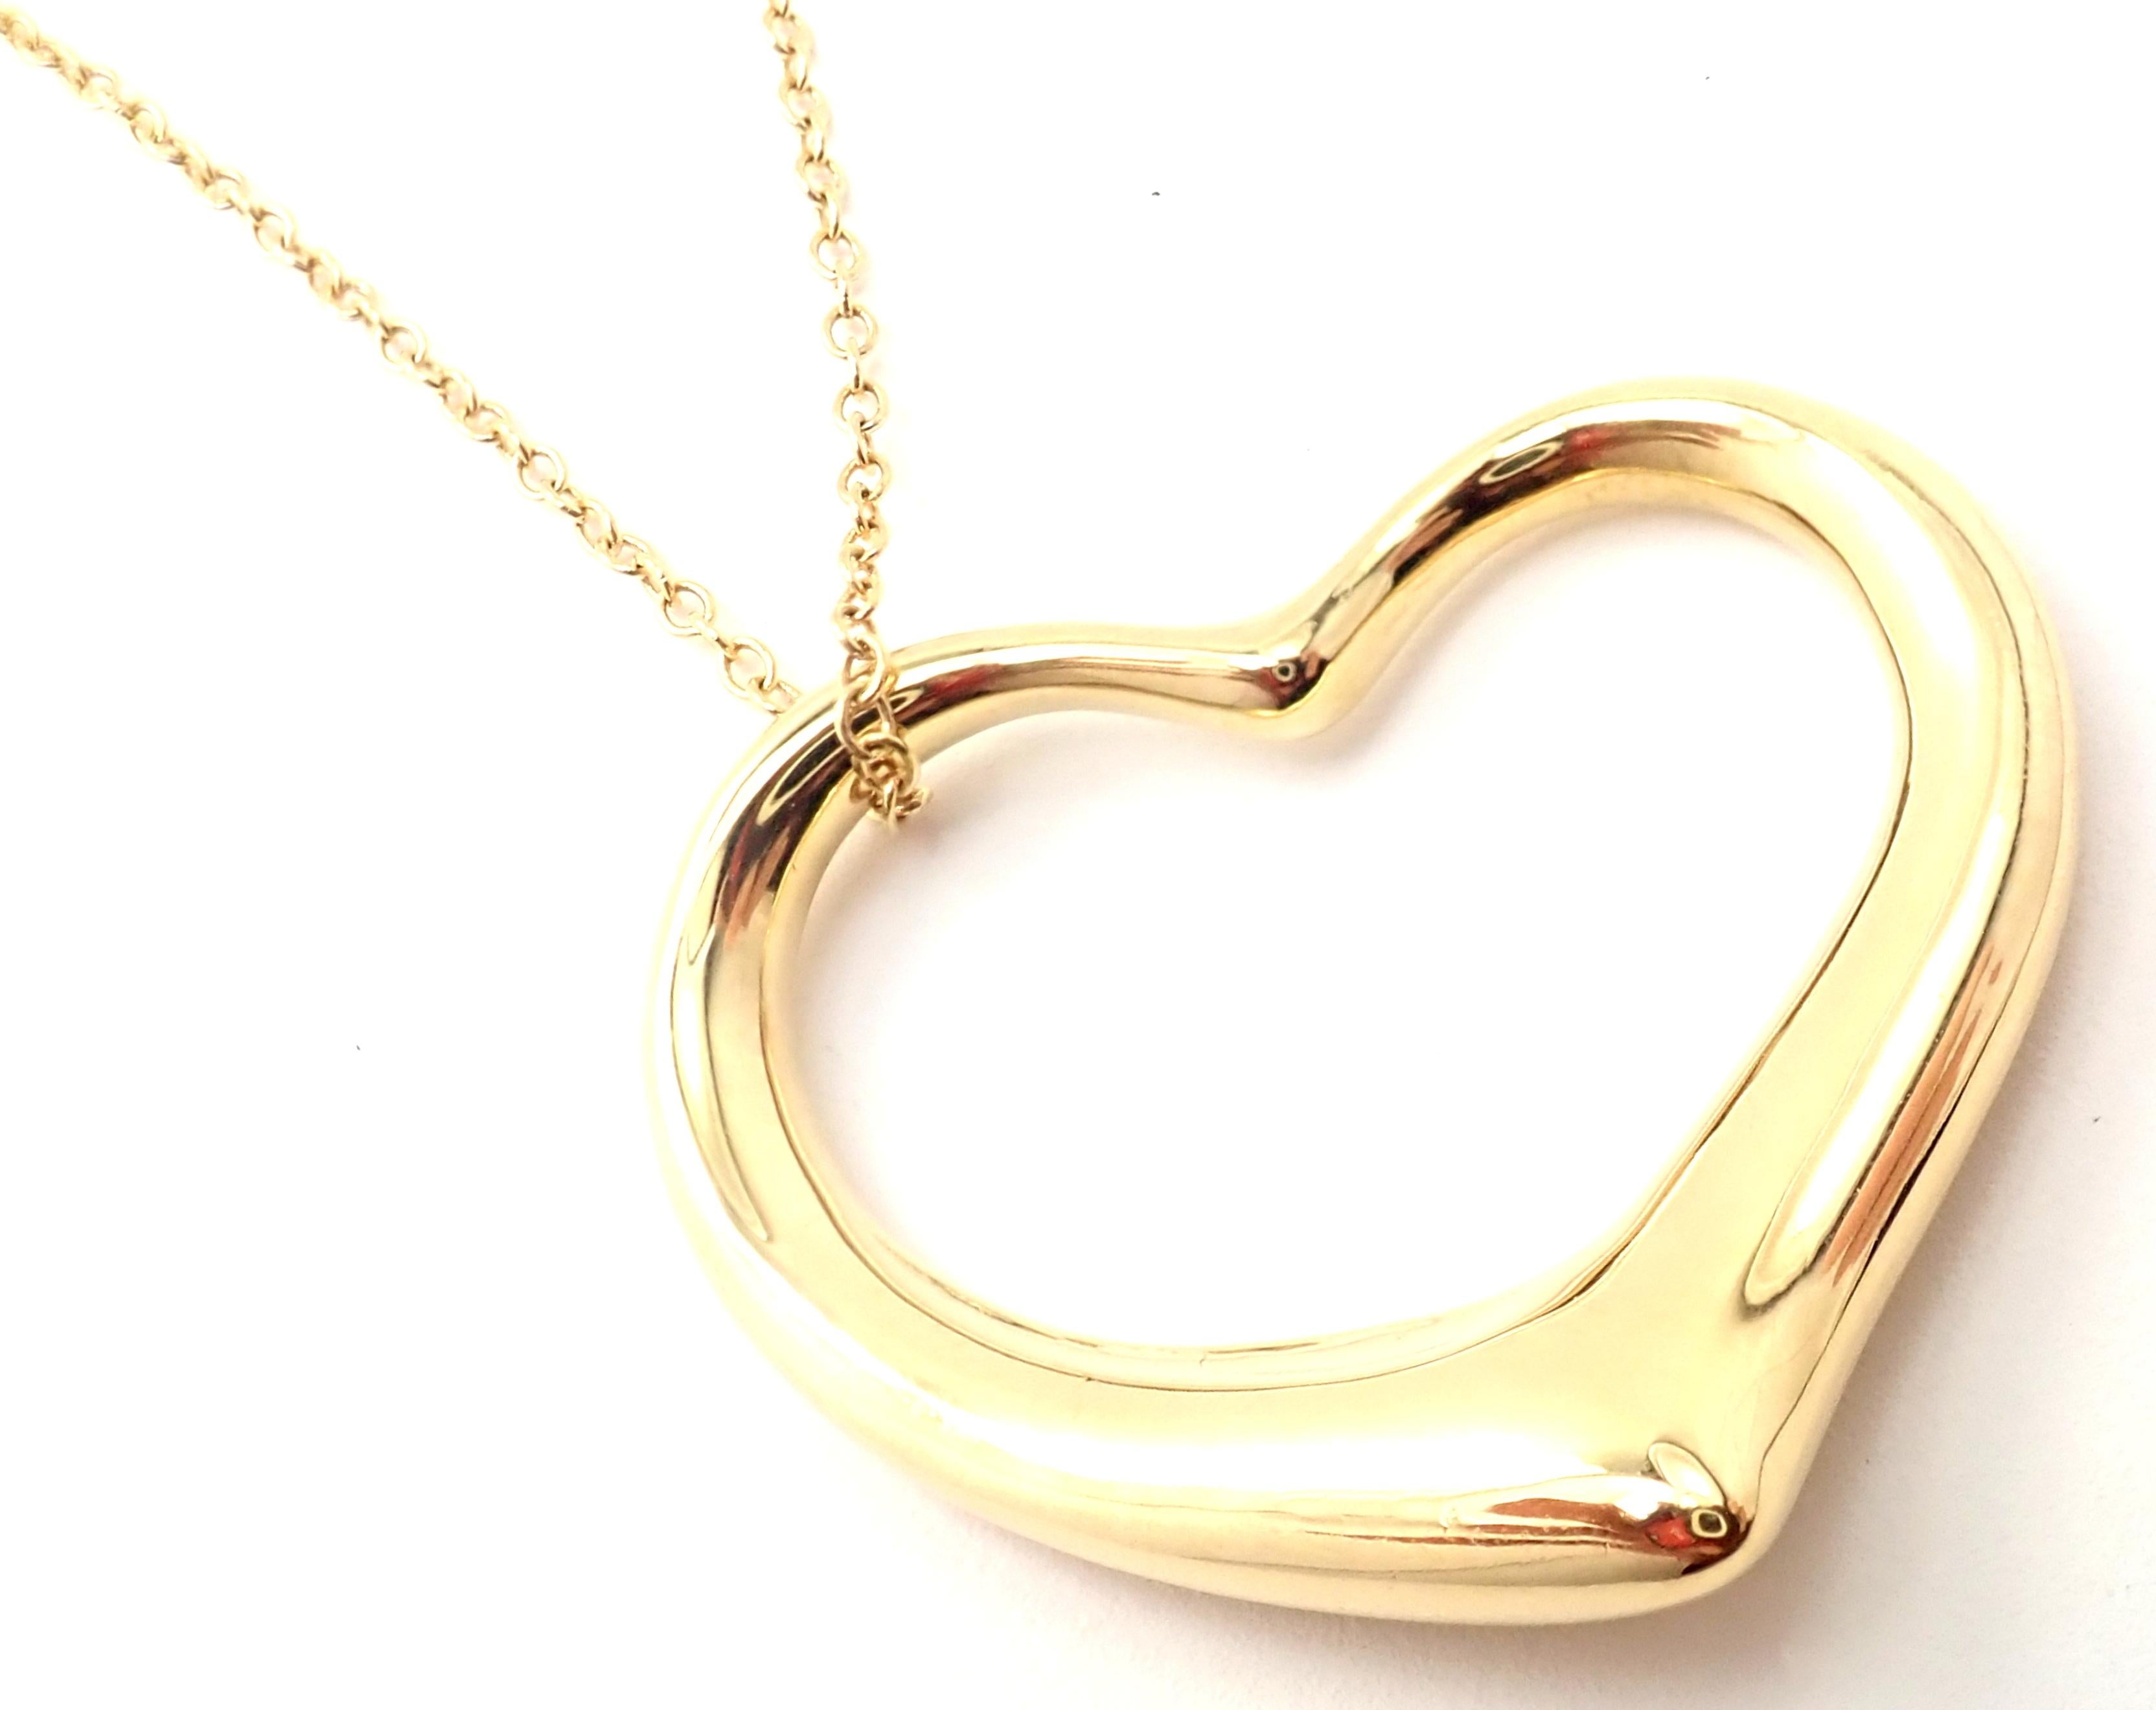 18k Yellow Gold Large Open Heart Pendant Necklace by Elsa Peretti for Tiffany & Co.
Details:
Length: 30